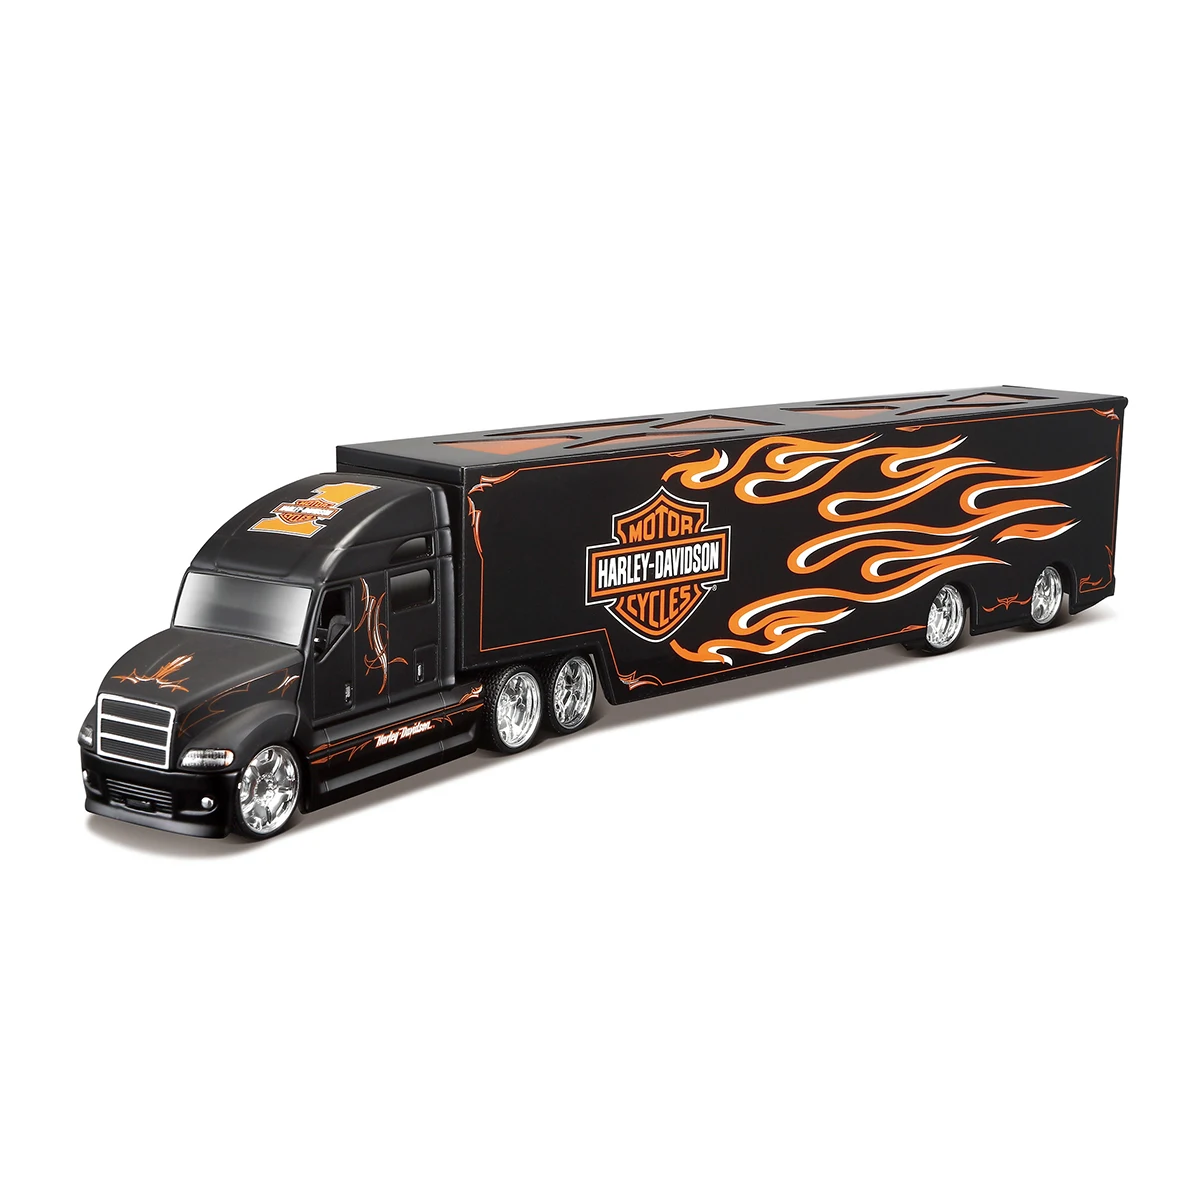 Maisto 1:64 Harley-Davidson Black Haulers Die Cast Collectible Hobbies Motorcycle Model Toys